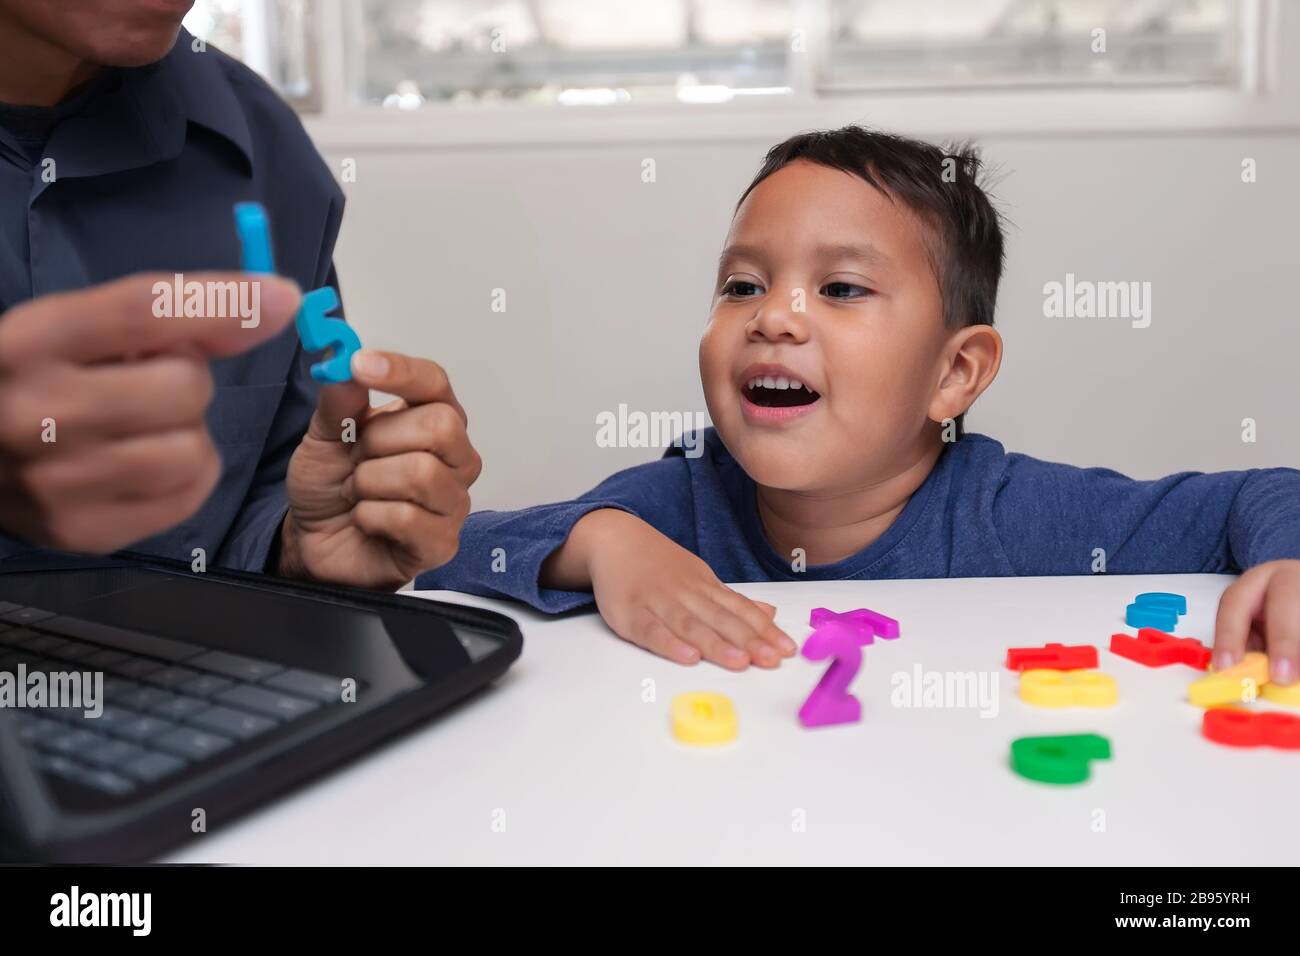 Home based study with tutor teaching a young boy how to count using number manipulatives and the child speaking the correct answer. Stock Photo